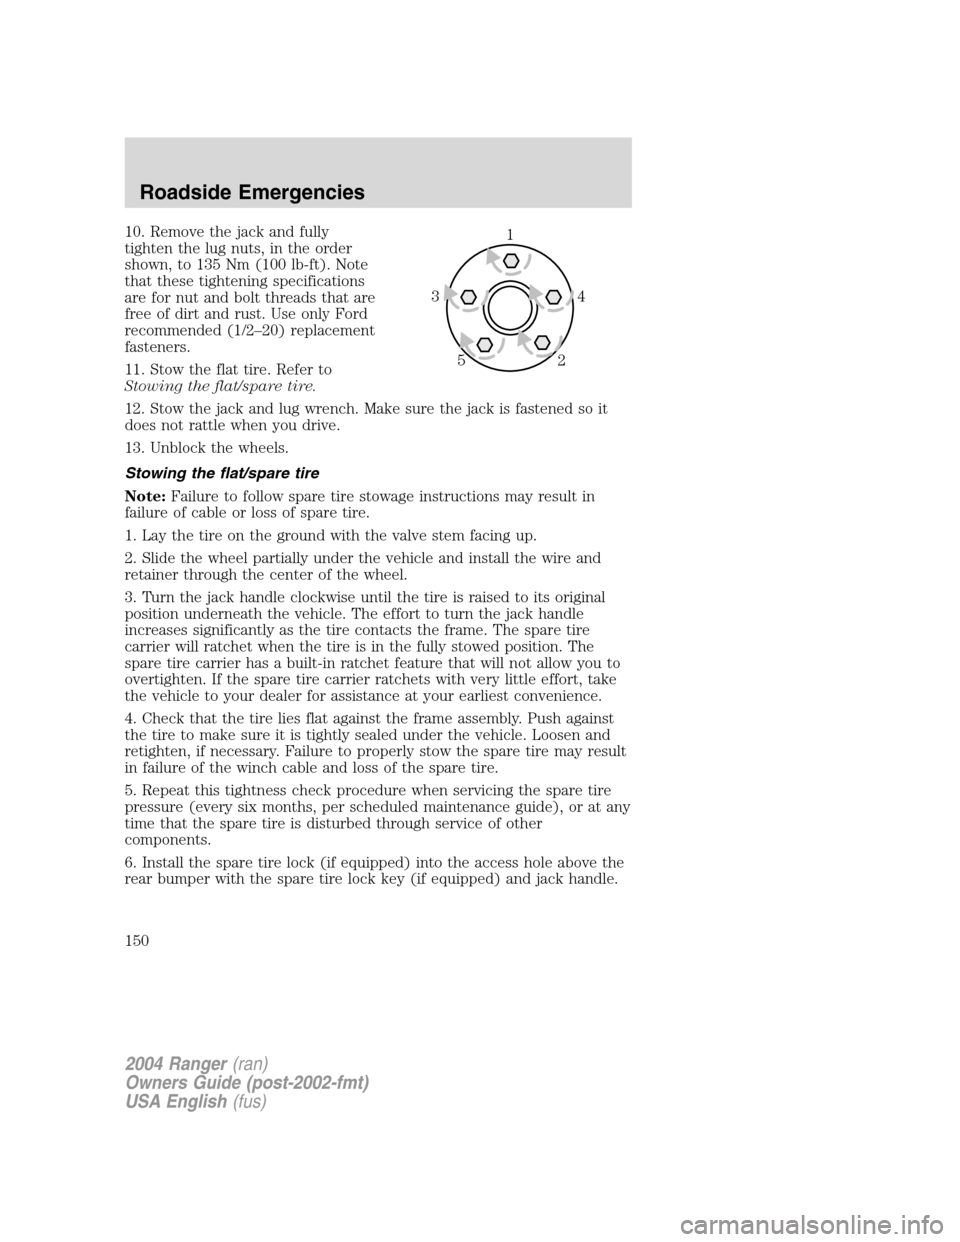 FORD RANGER 2004 2.G Owners Manual 10. Remove the jack and fully
tighten the lug nuts, in the order
shown, to 135 Nm (100 lb-ft). Note
that these tightening specifications
are for nut and bolt threads that are
free of dirt and rust. Us